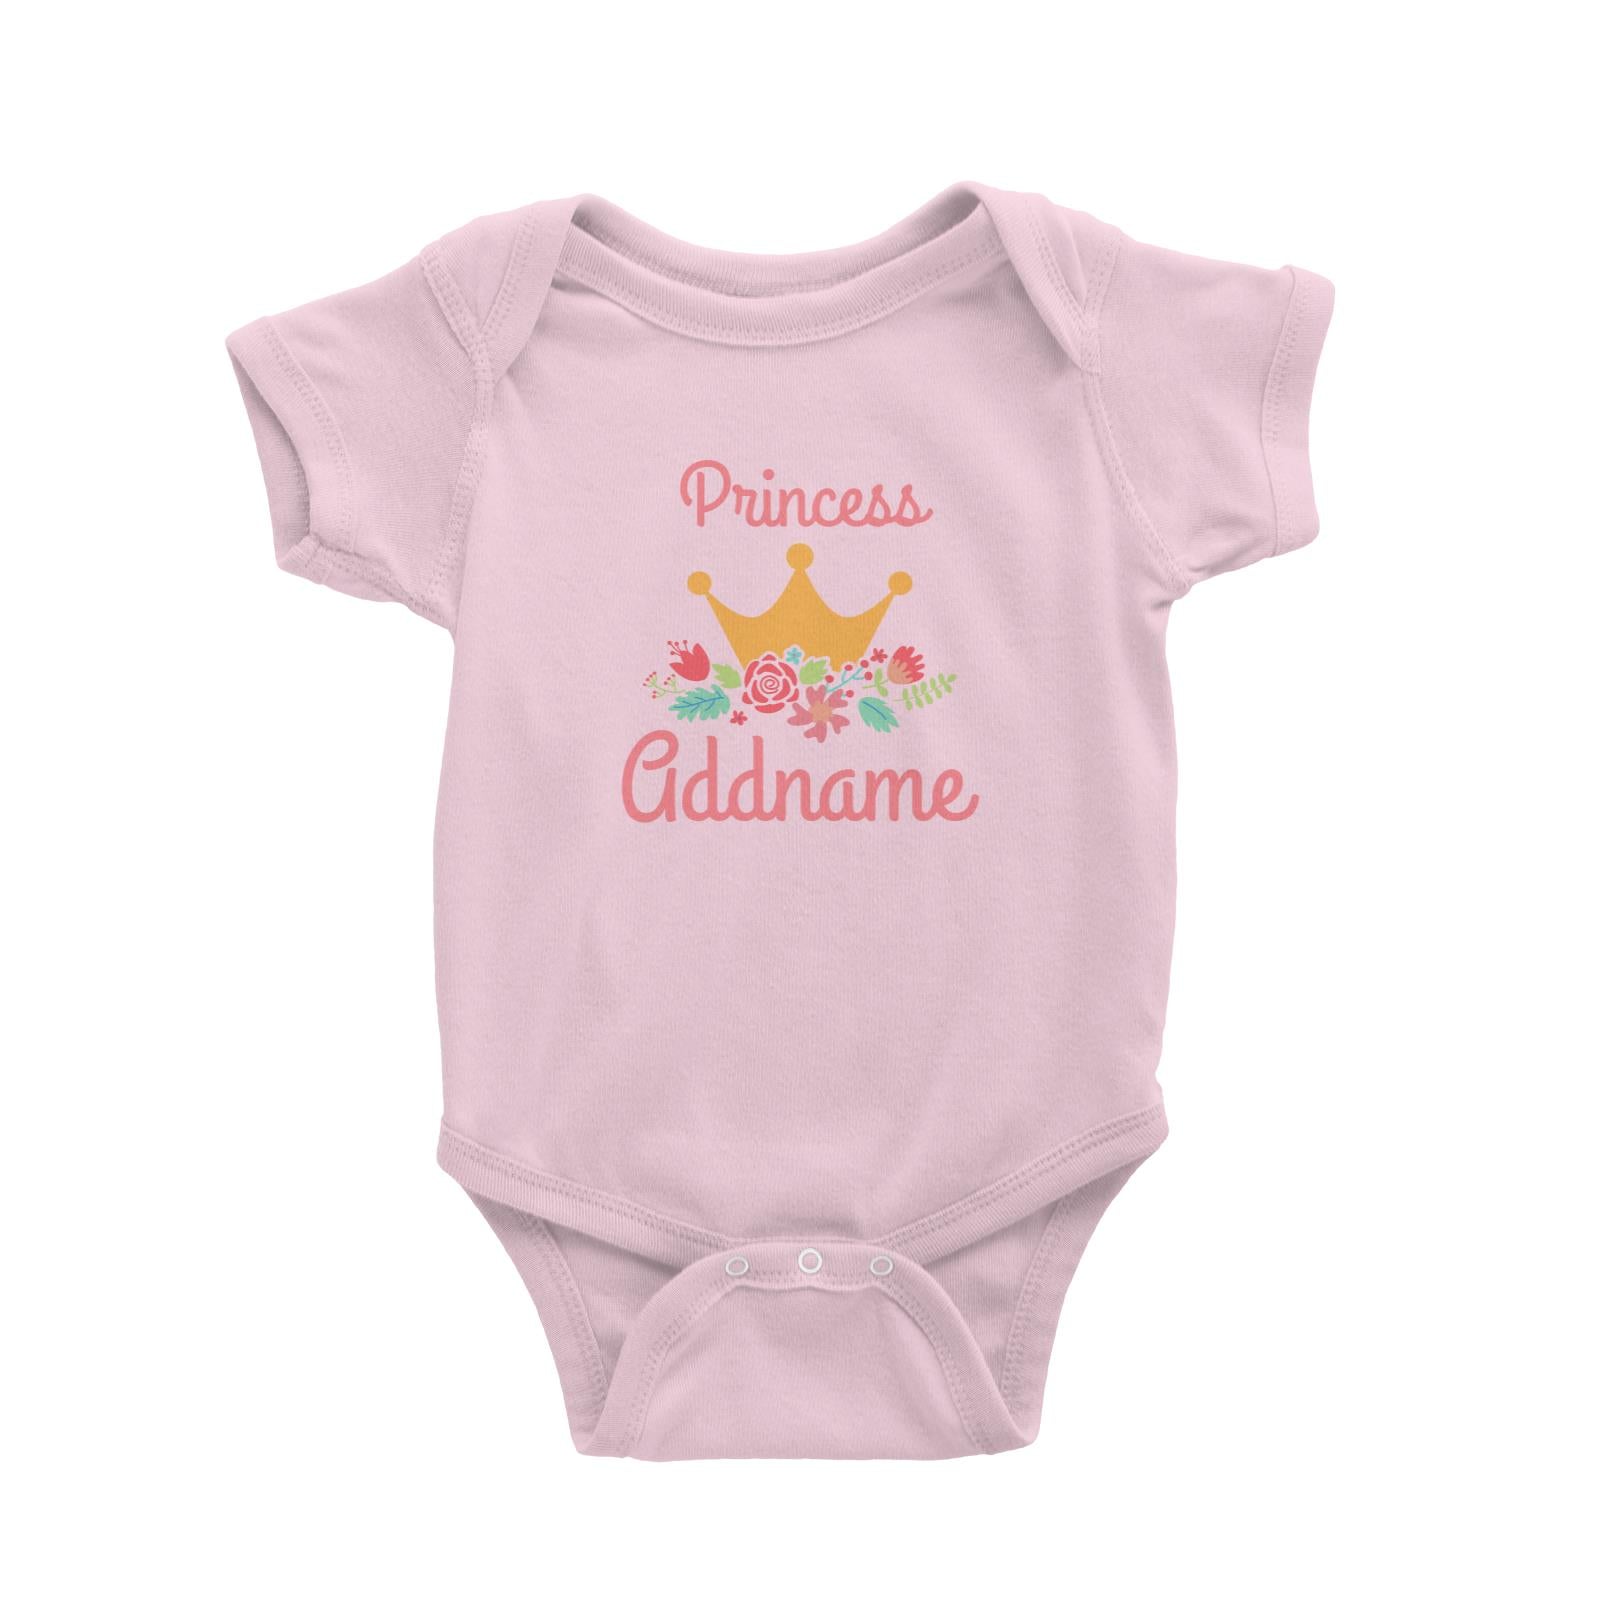 Princess Addname with Tiara and Flowers Baby Romper